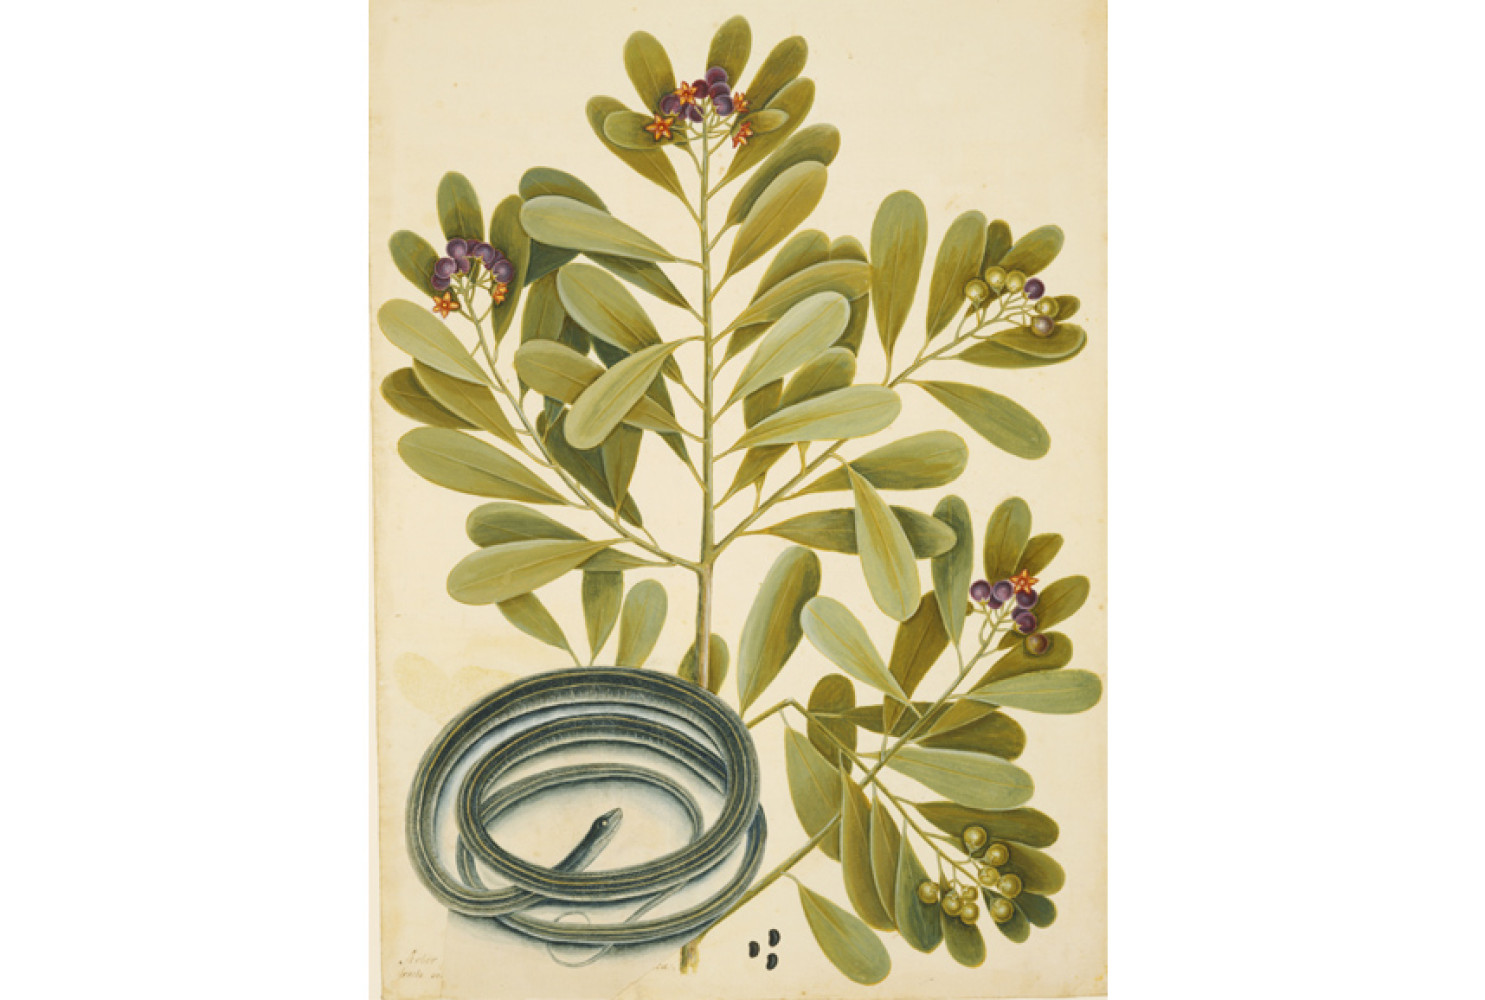 The Ribbon-Snake and Winter's Bark, ca. 1722—1726, by Mark Catesby (British, 1682—1749); watercolor and bodycolor heightened with gum arabic, over touches of pencil; Royal Collection Trust/© Her Majesty Queen Elizabeth II 2017